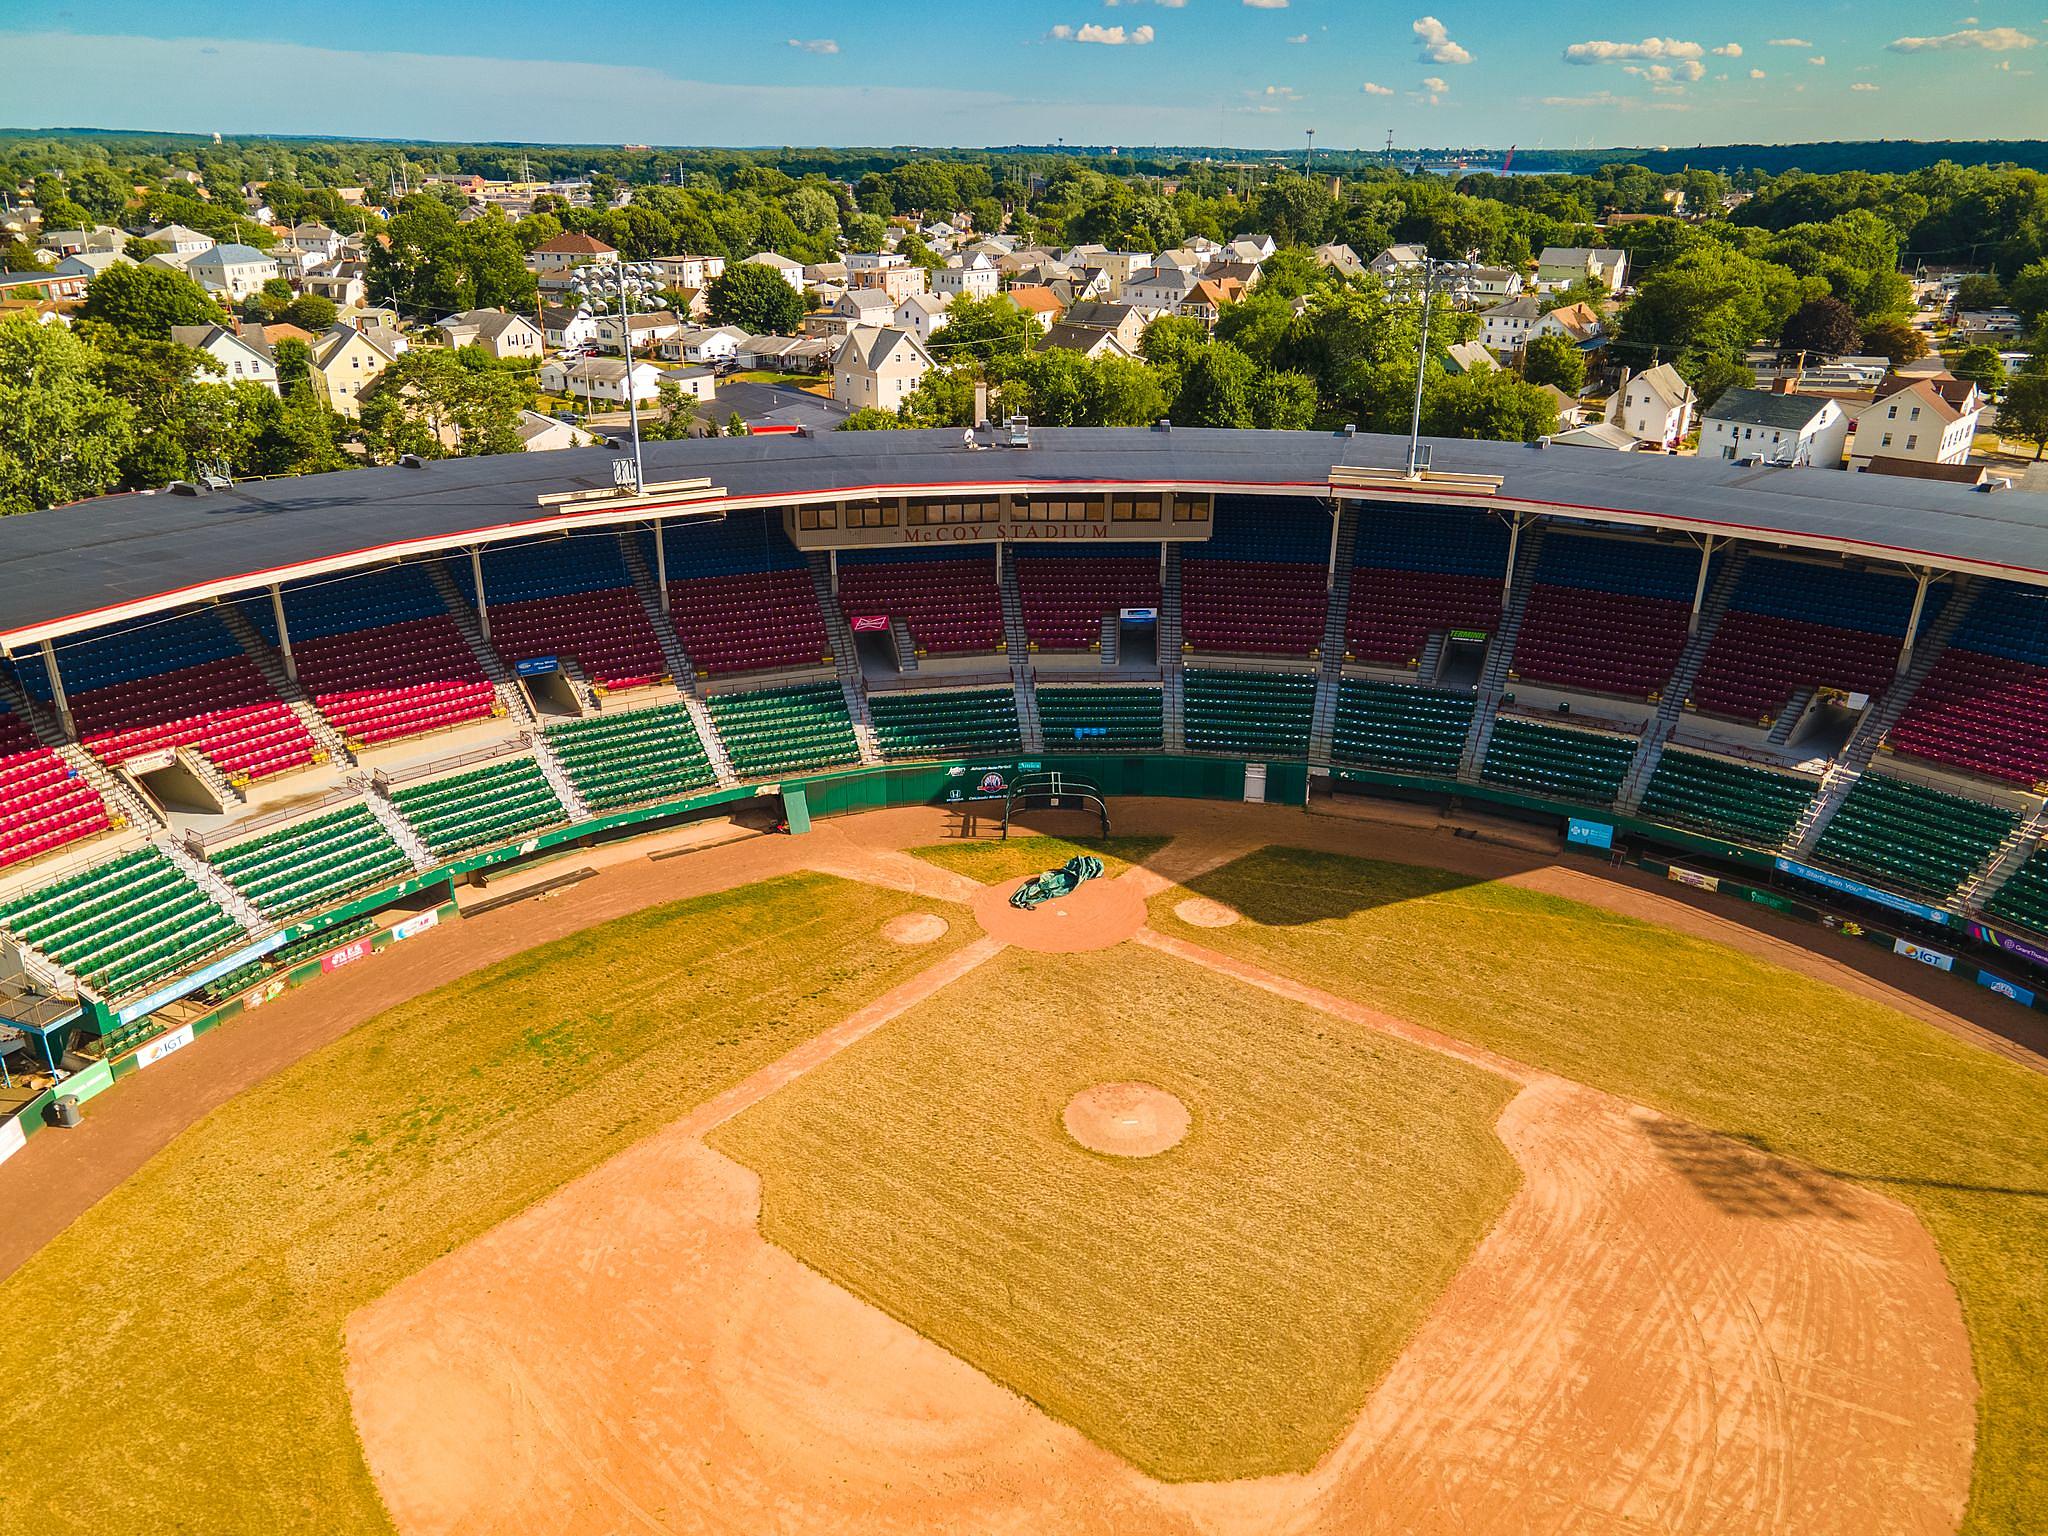 Fans get last chance to purchase pieces of PawSox history